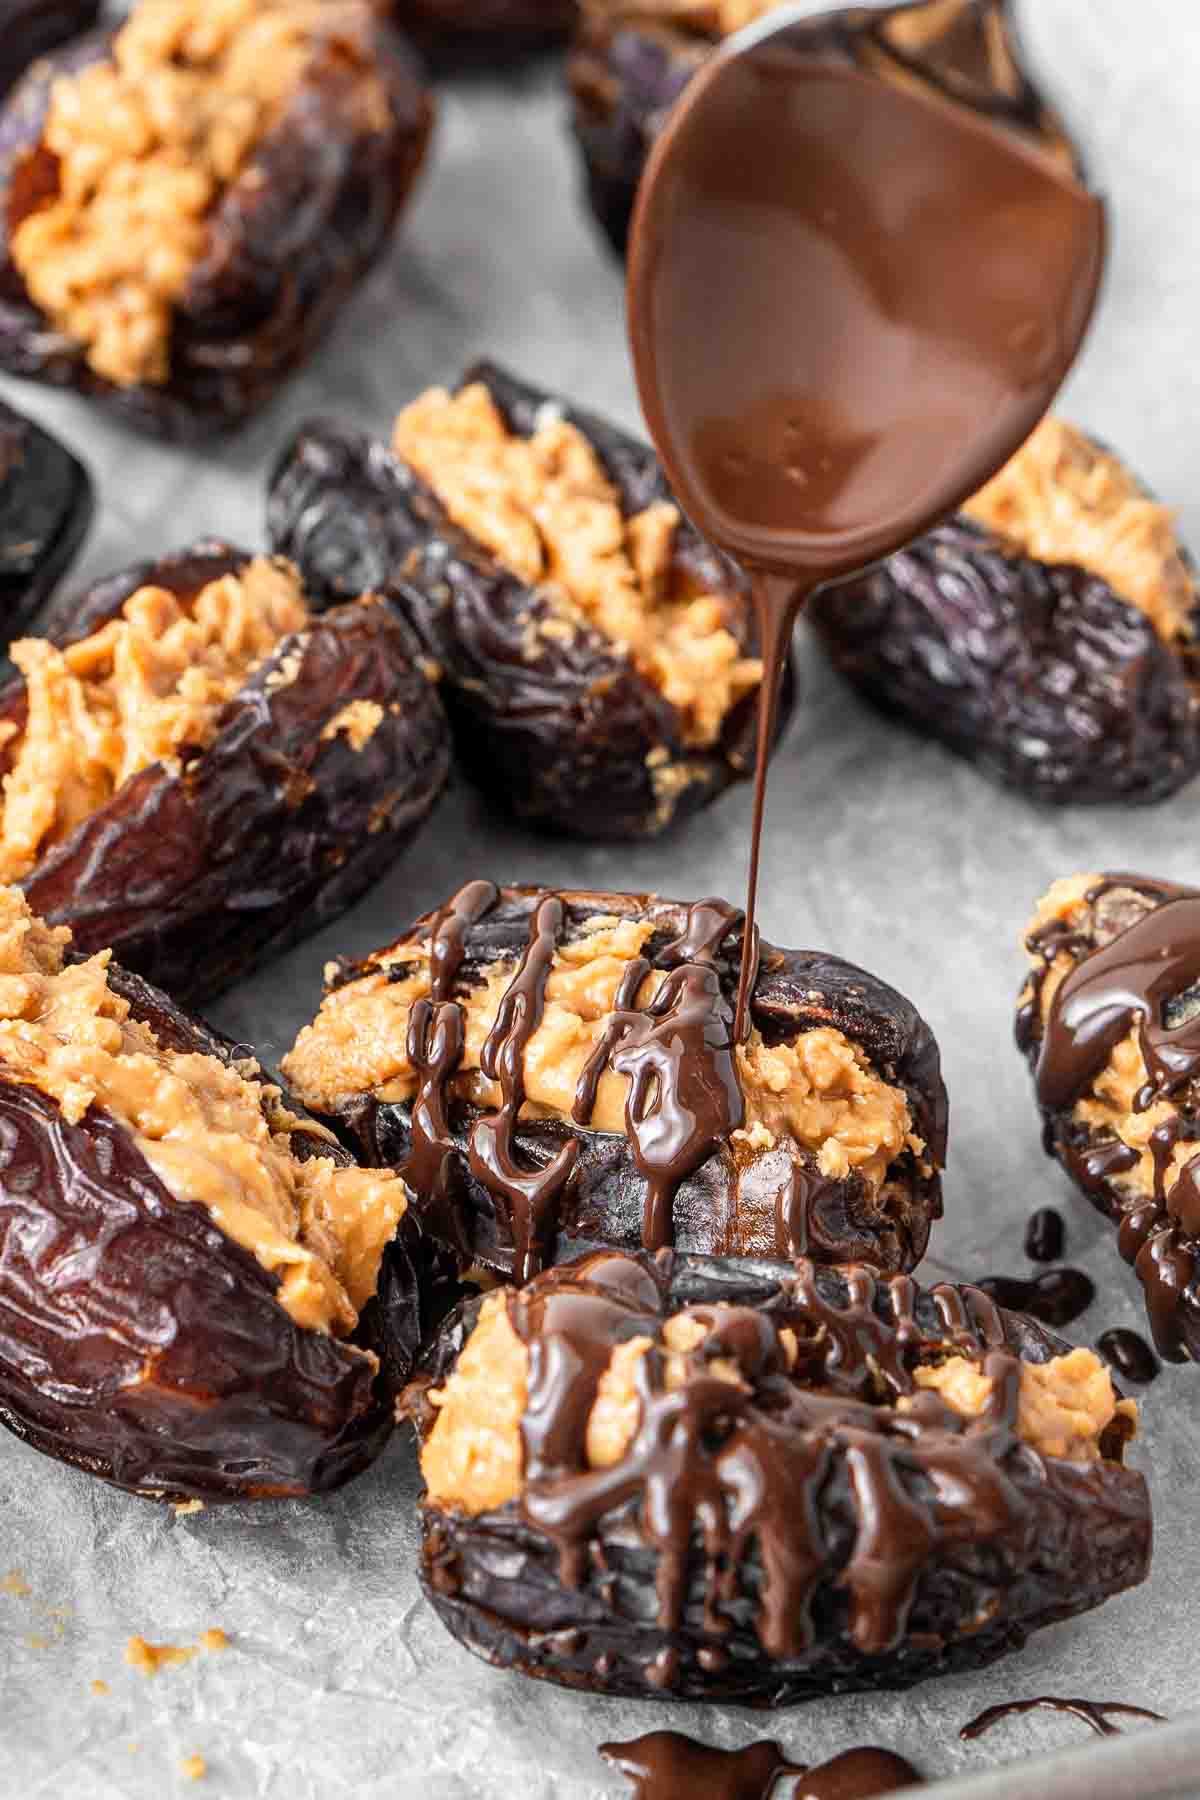 A spoon drizzling melted dark chocolate over the stuffed dates.